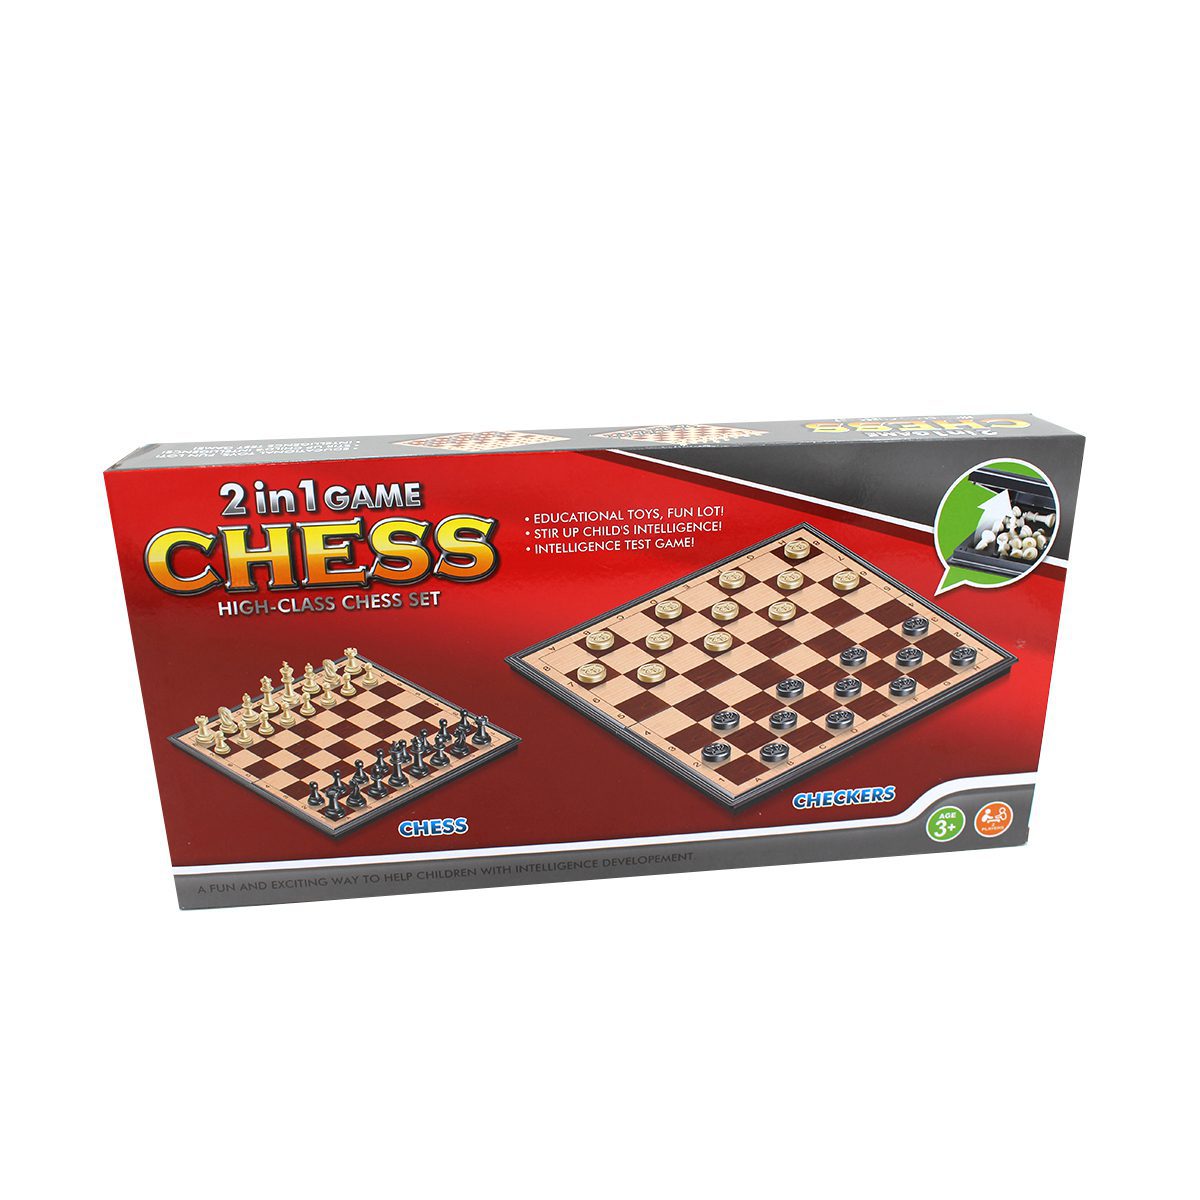 Buy Chess Board Game in Barbados | Fashionation